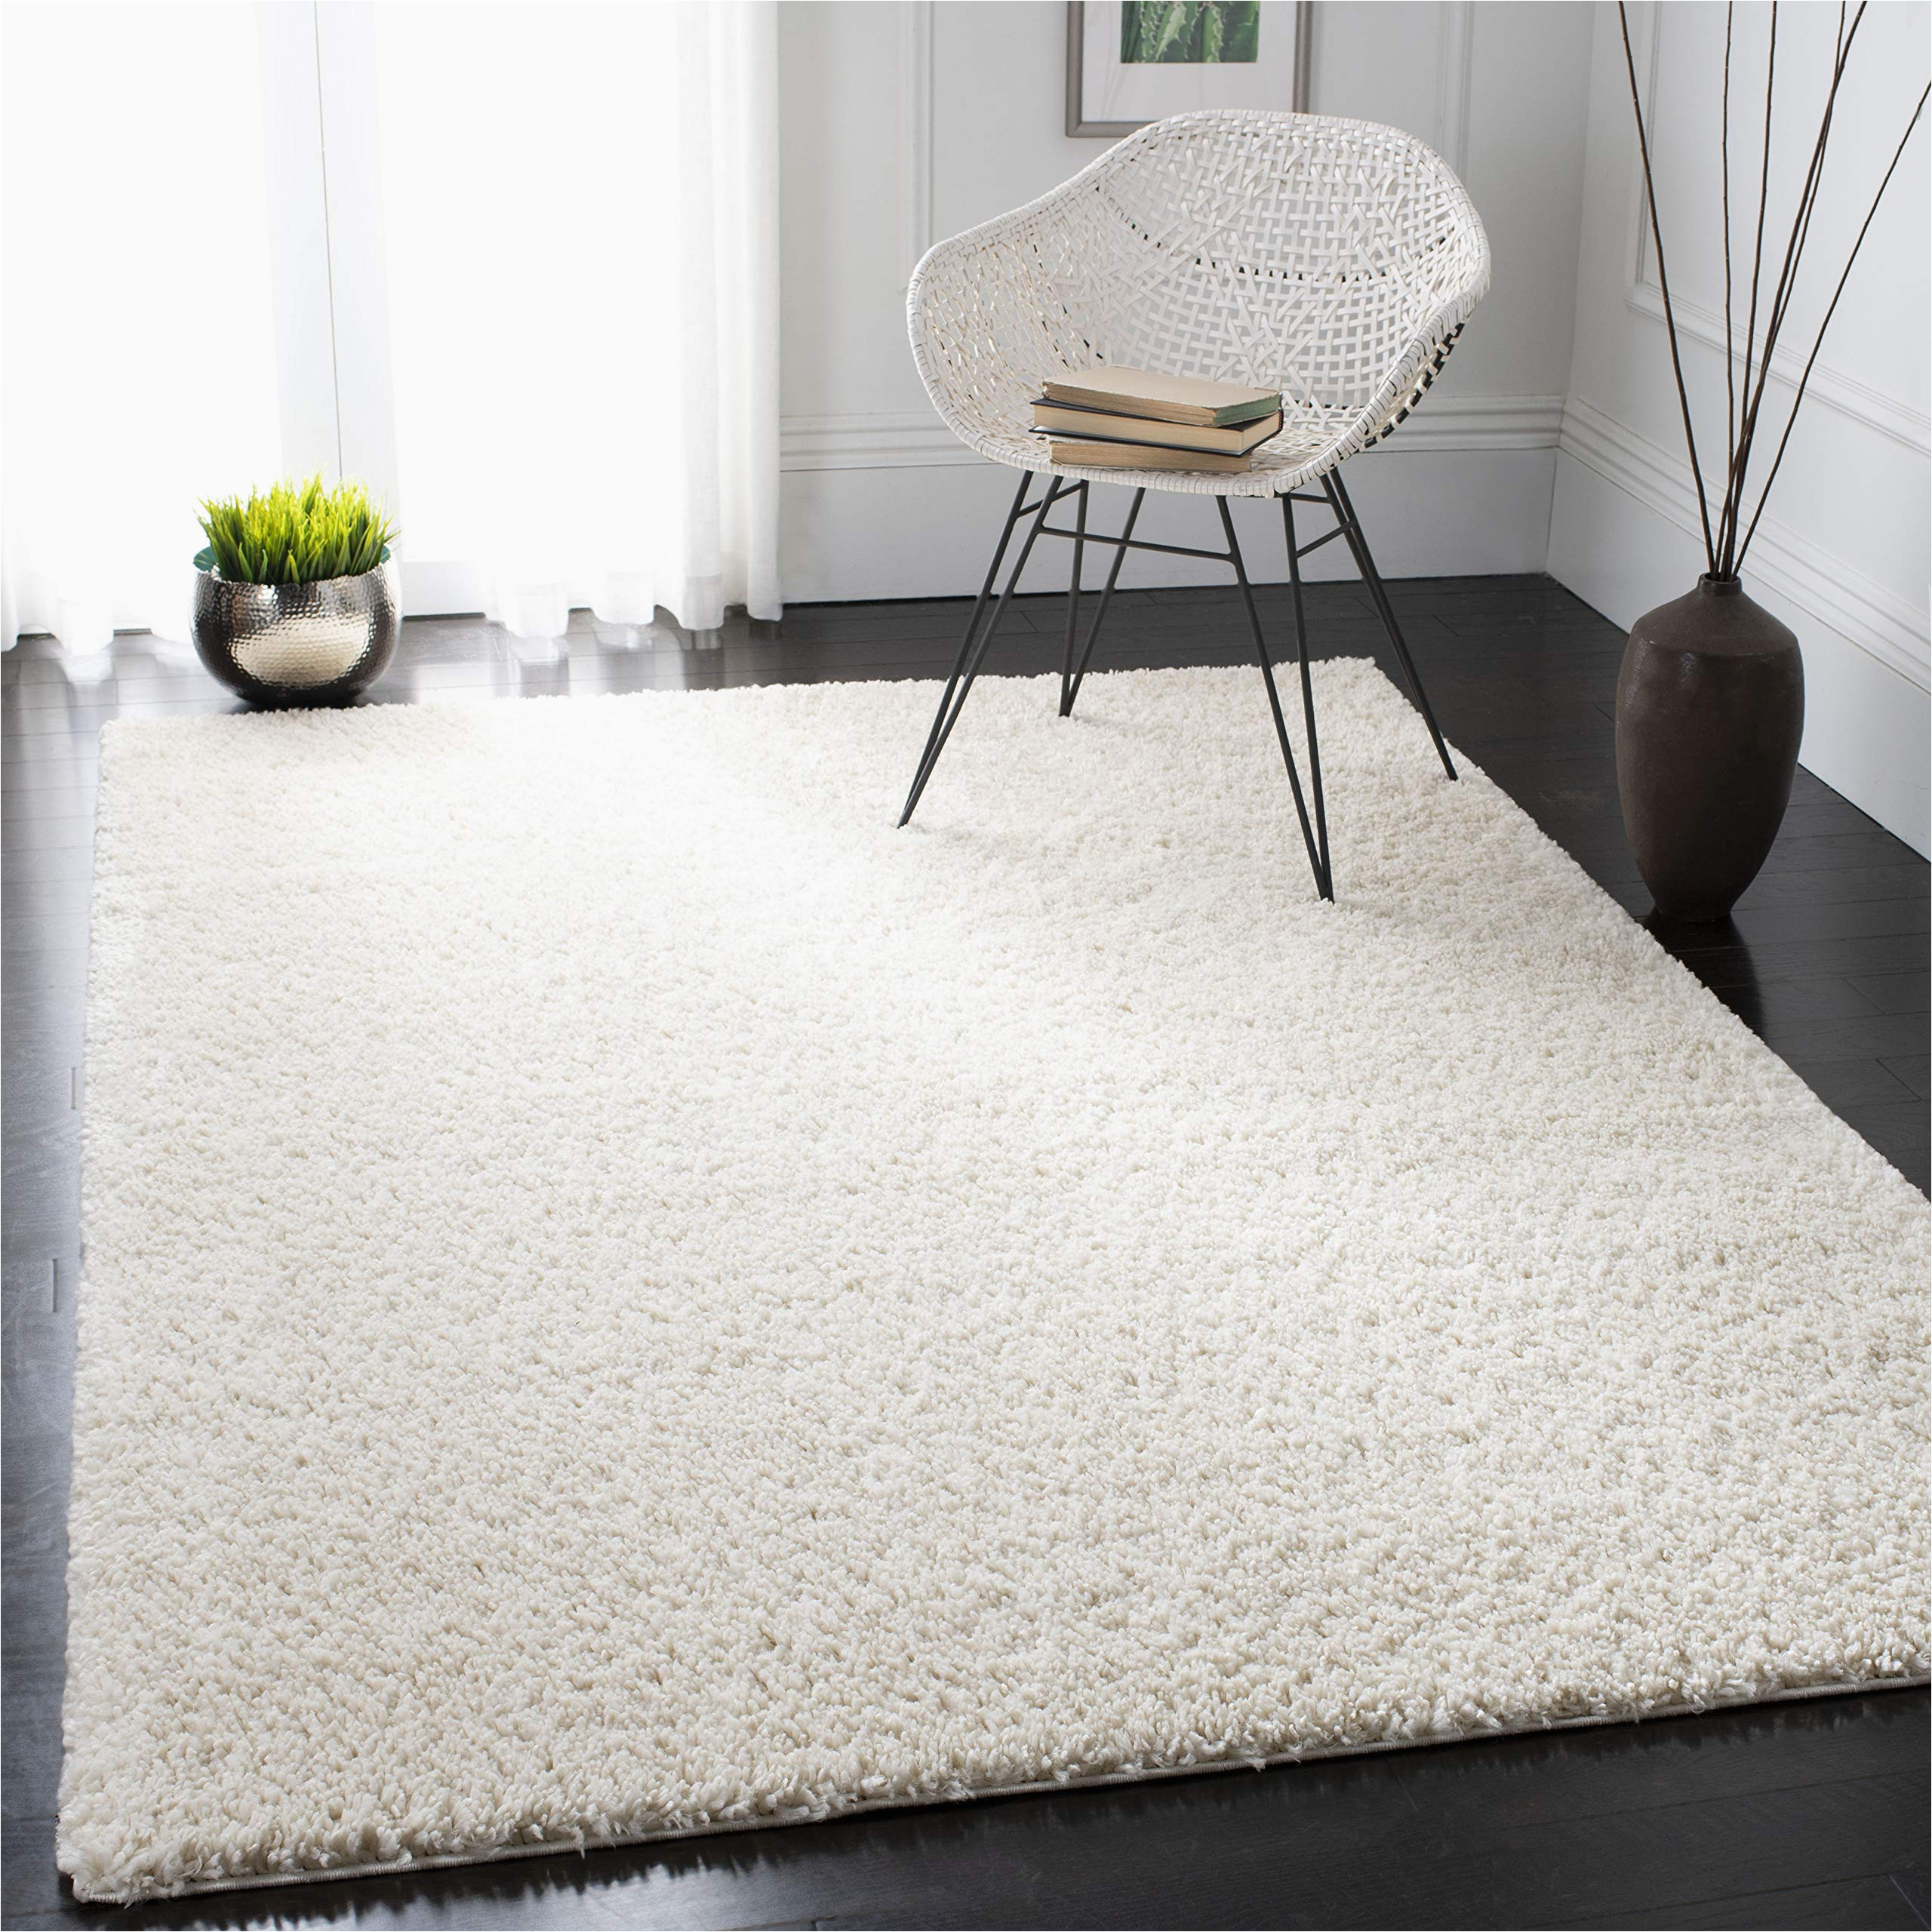 Solid Ivory area Rug 8×10 Amazon.com: Safavieh August Shag Collection 8′ X 10′ Ivory Aug900c …